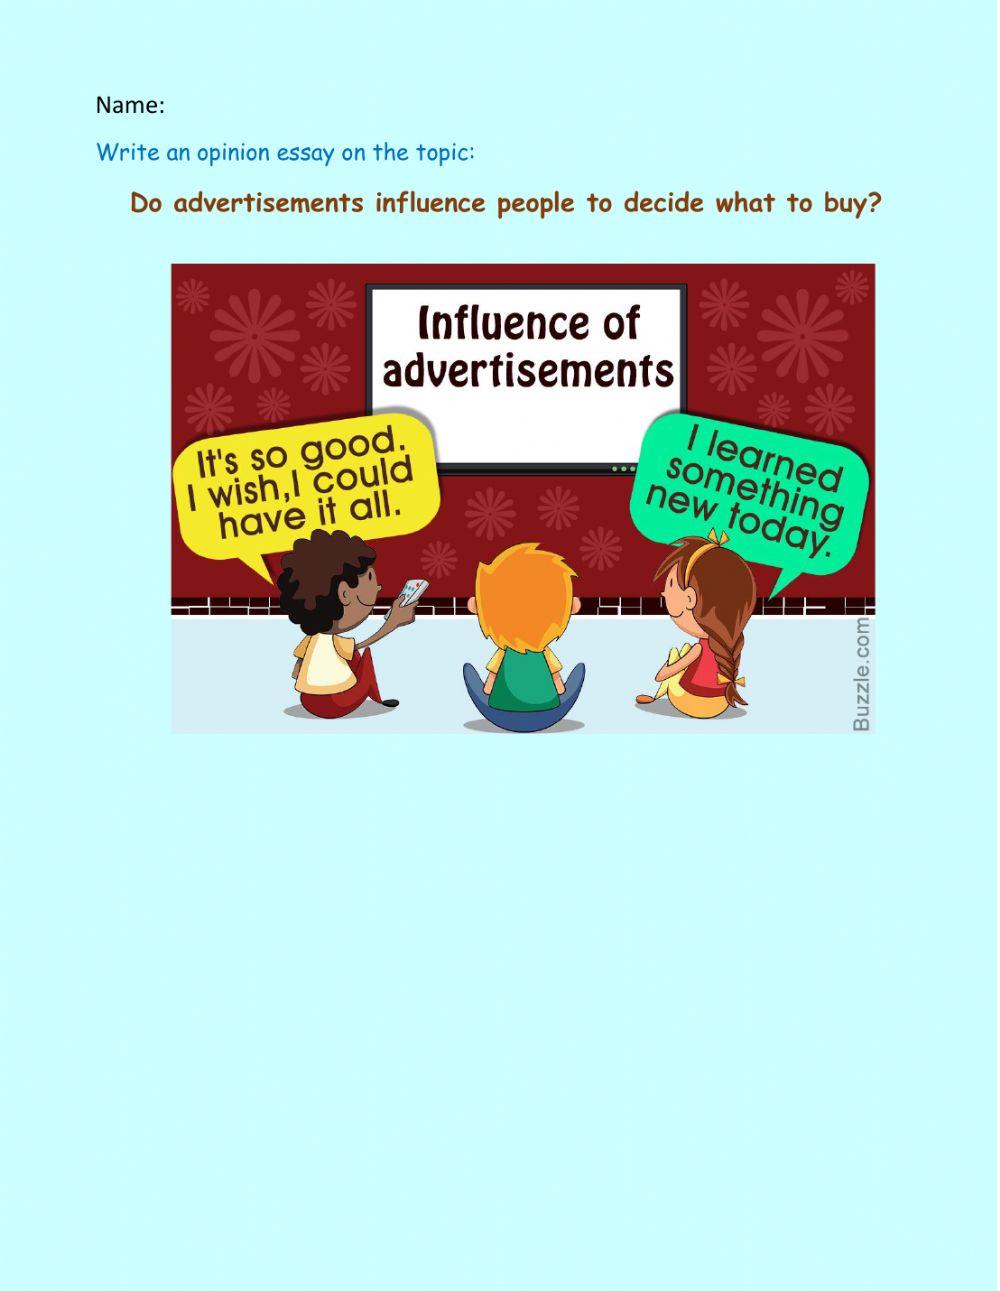 Opinion essay about advertisement